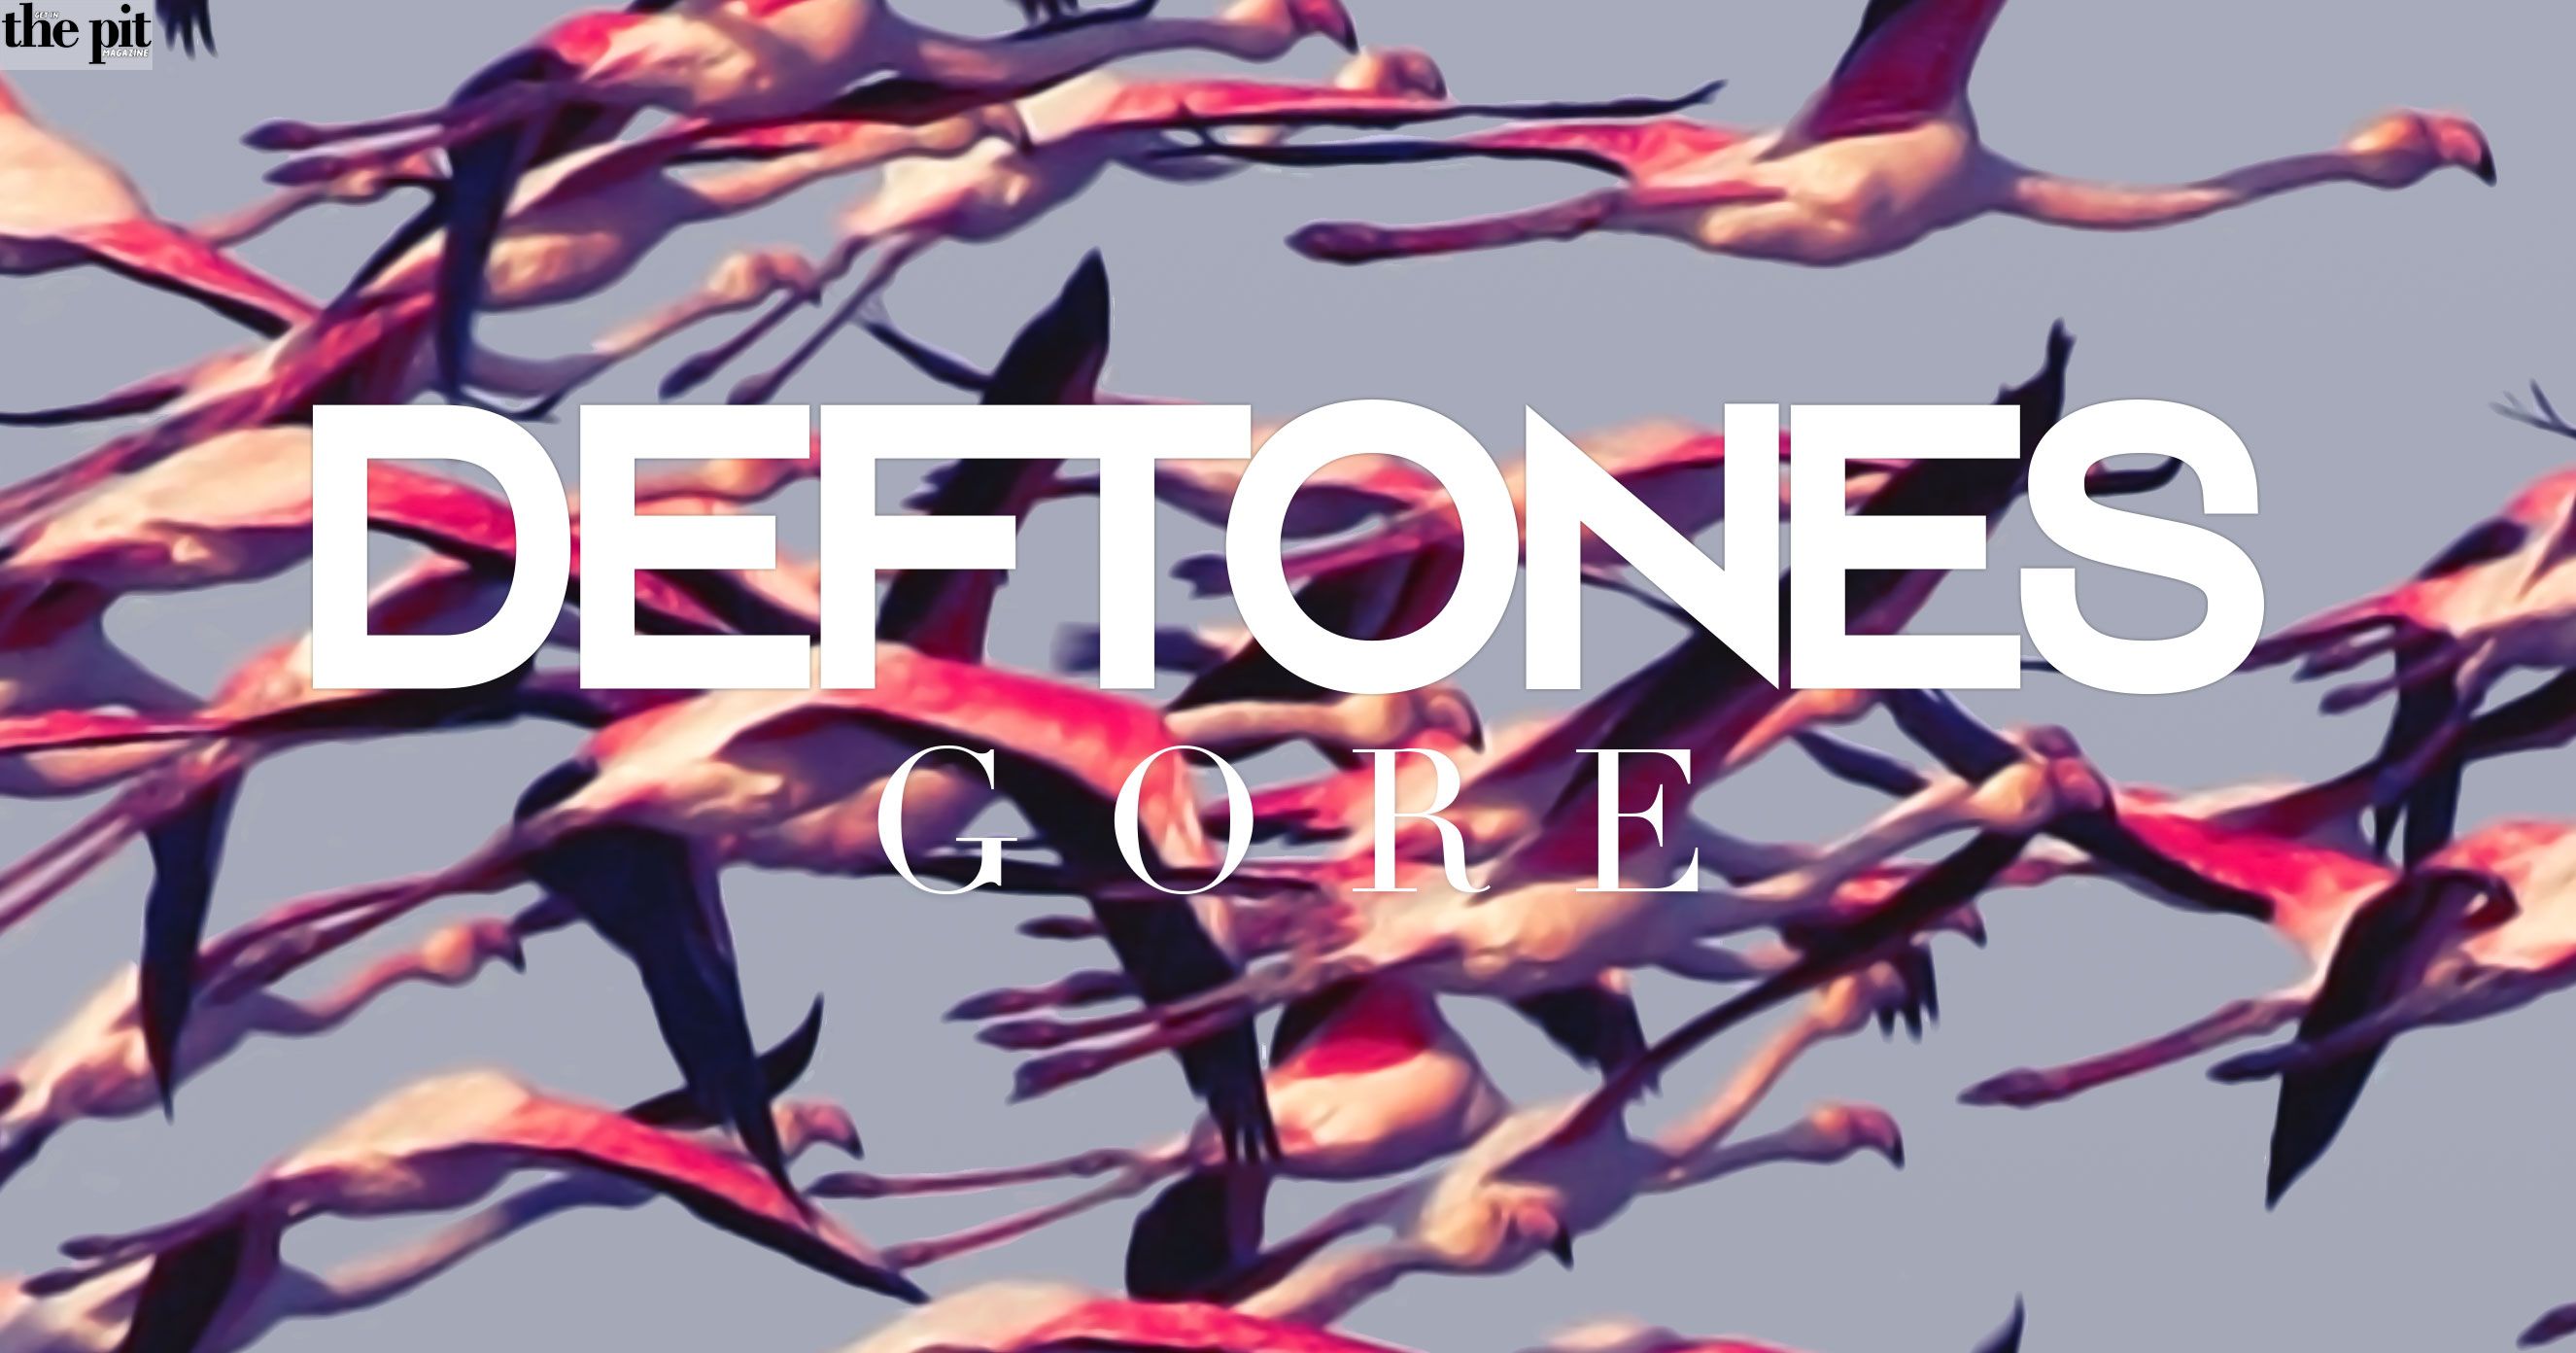 Album cover of "gore" by deftones featuring a stylized image of flamingos in flight with the band's name and album title overlay.